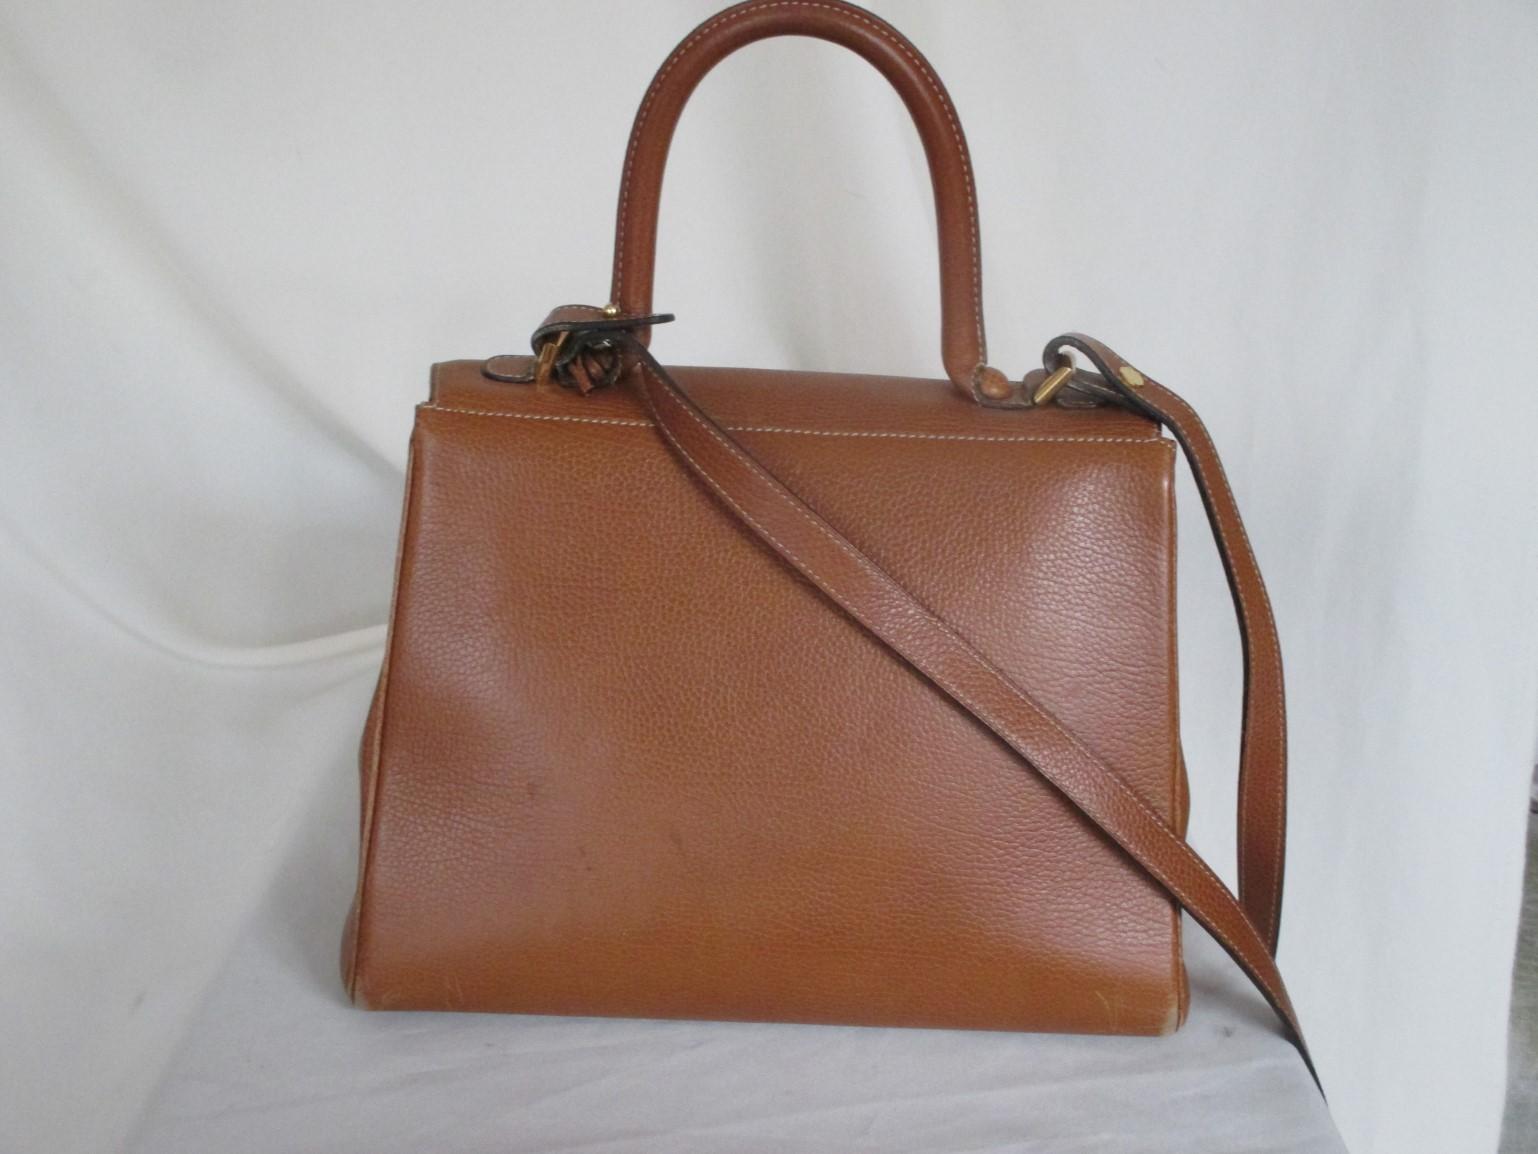 This vintage bag is made of cognac brown calfskin leather with gold hardware, can be worn as cross body-hand or shoulder bag.
Model: Delvaux Brilliant MM, designed in 1958.
Lining is leather suede with 1 zip pocket and 1 open pocket. The leather has